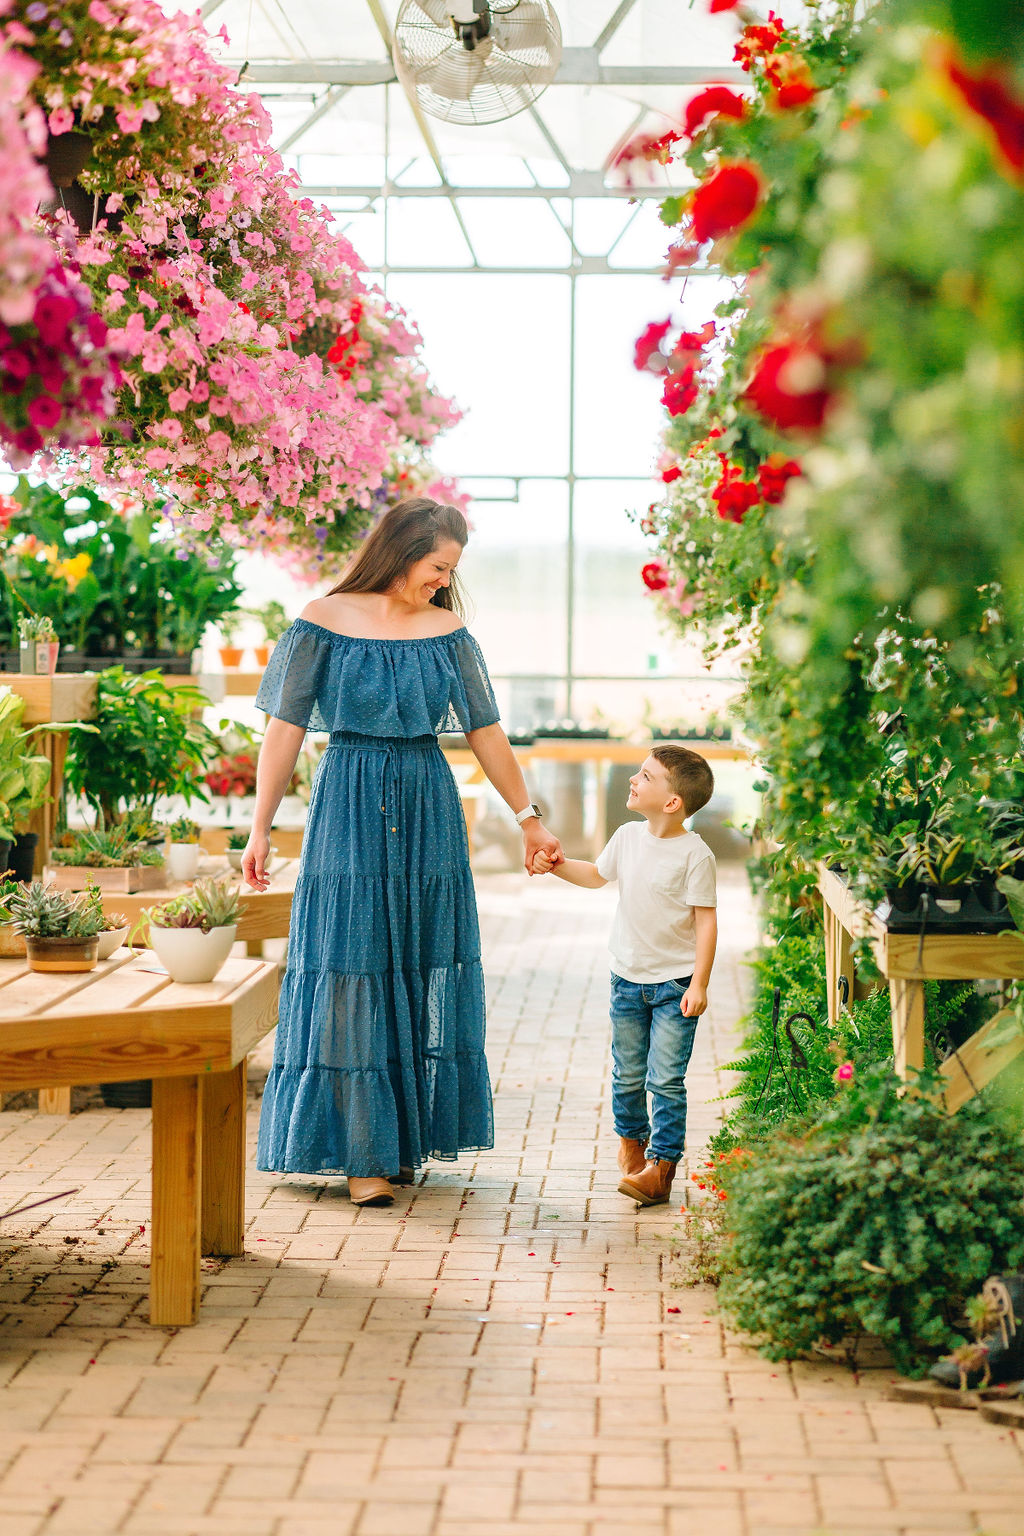 A mother and her young son walk through a greenhouse full of flowers holding hands